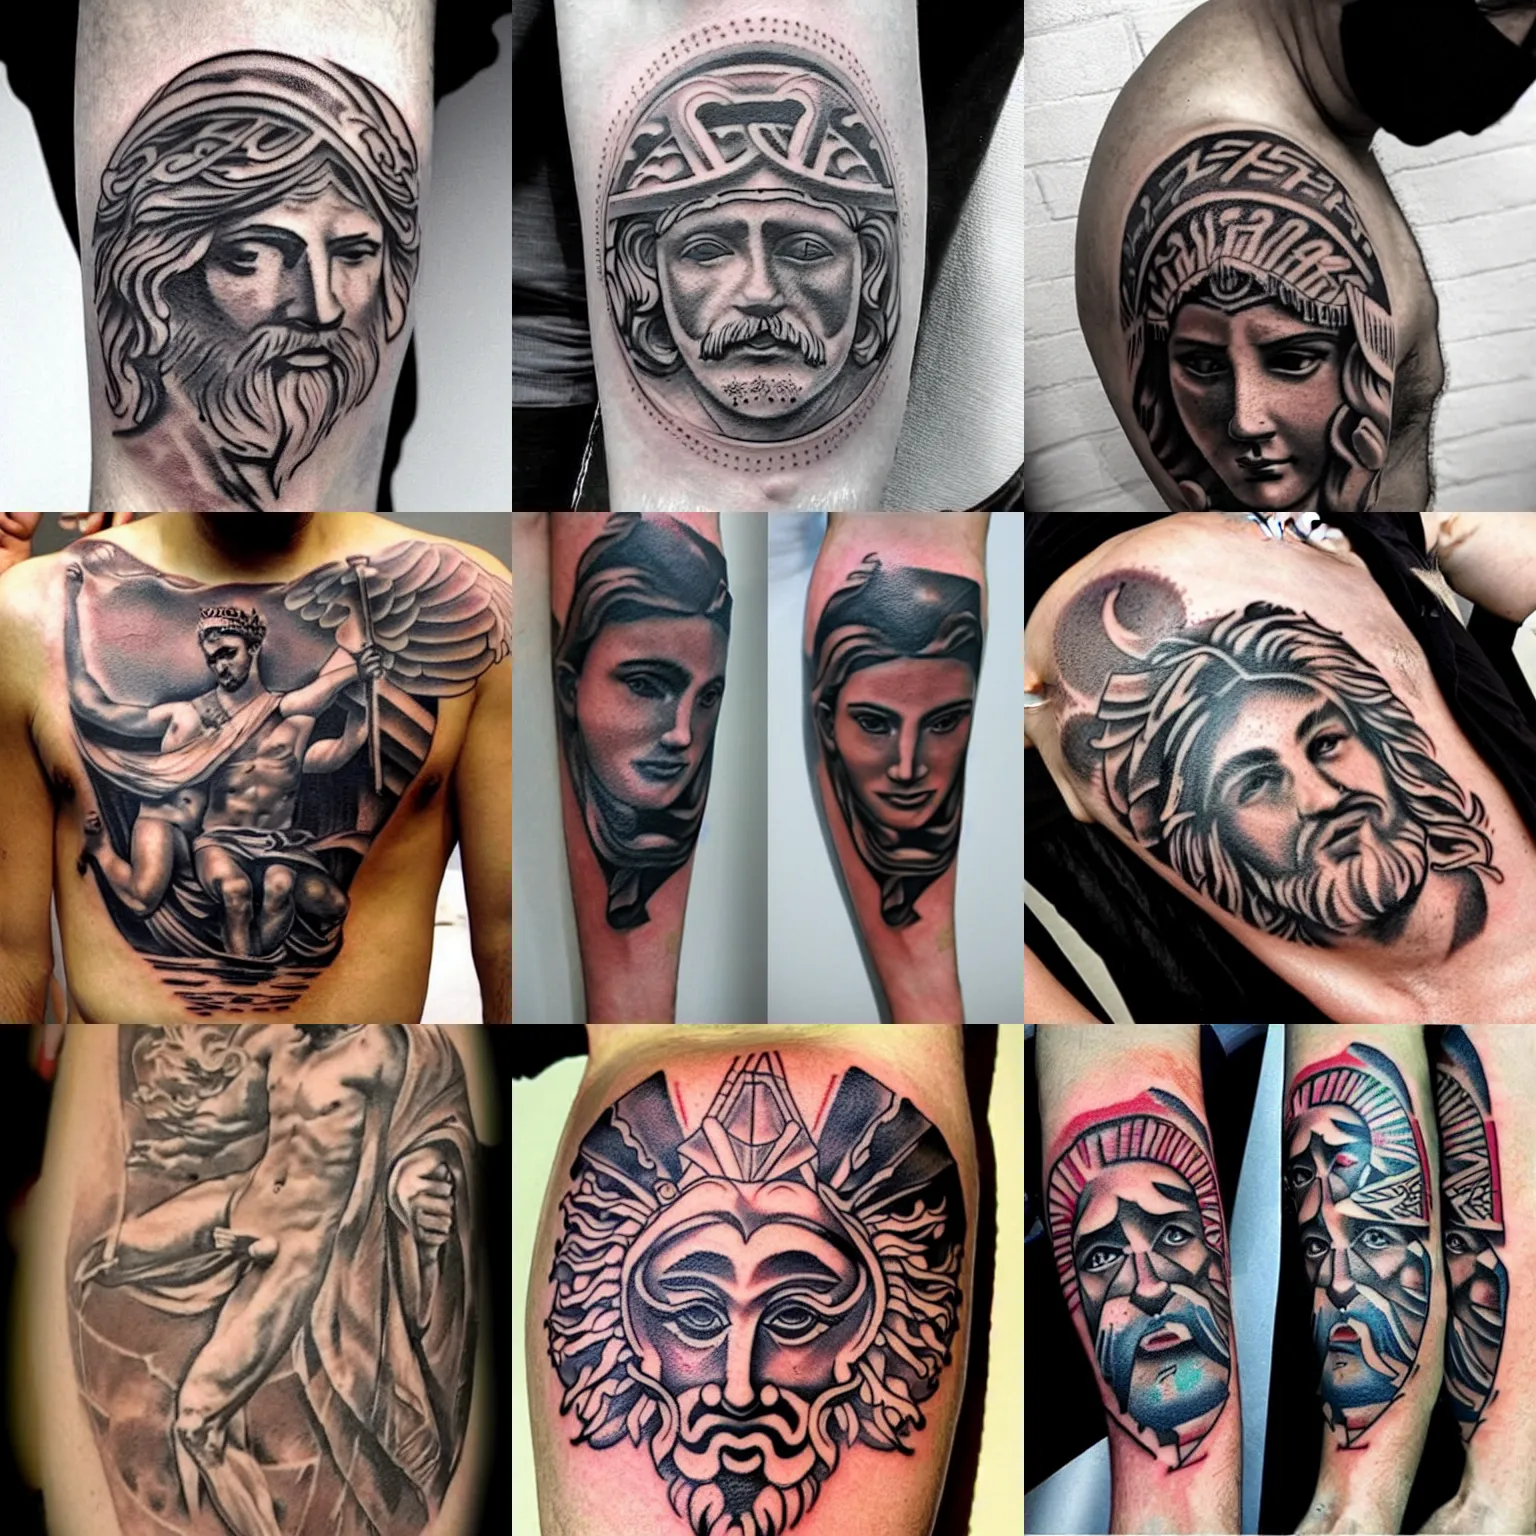 101 Amazing Greek Tattoo Designs You Need To See! | Outsons | Men's Fashion  Tips And Style Guide For 20… | Greek tattoos, Mythology tattoos, Greek  mythology tattoos